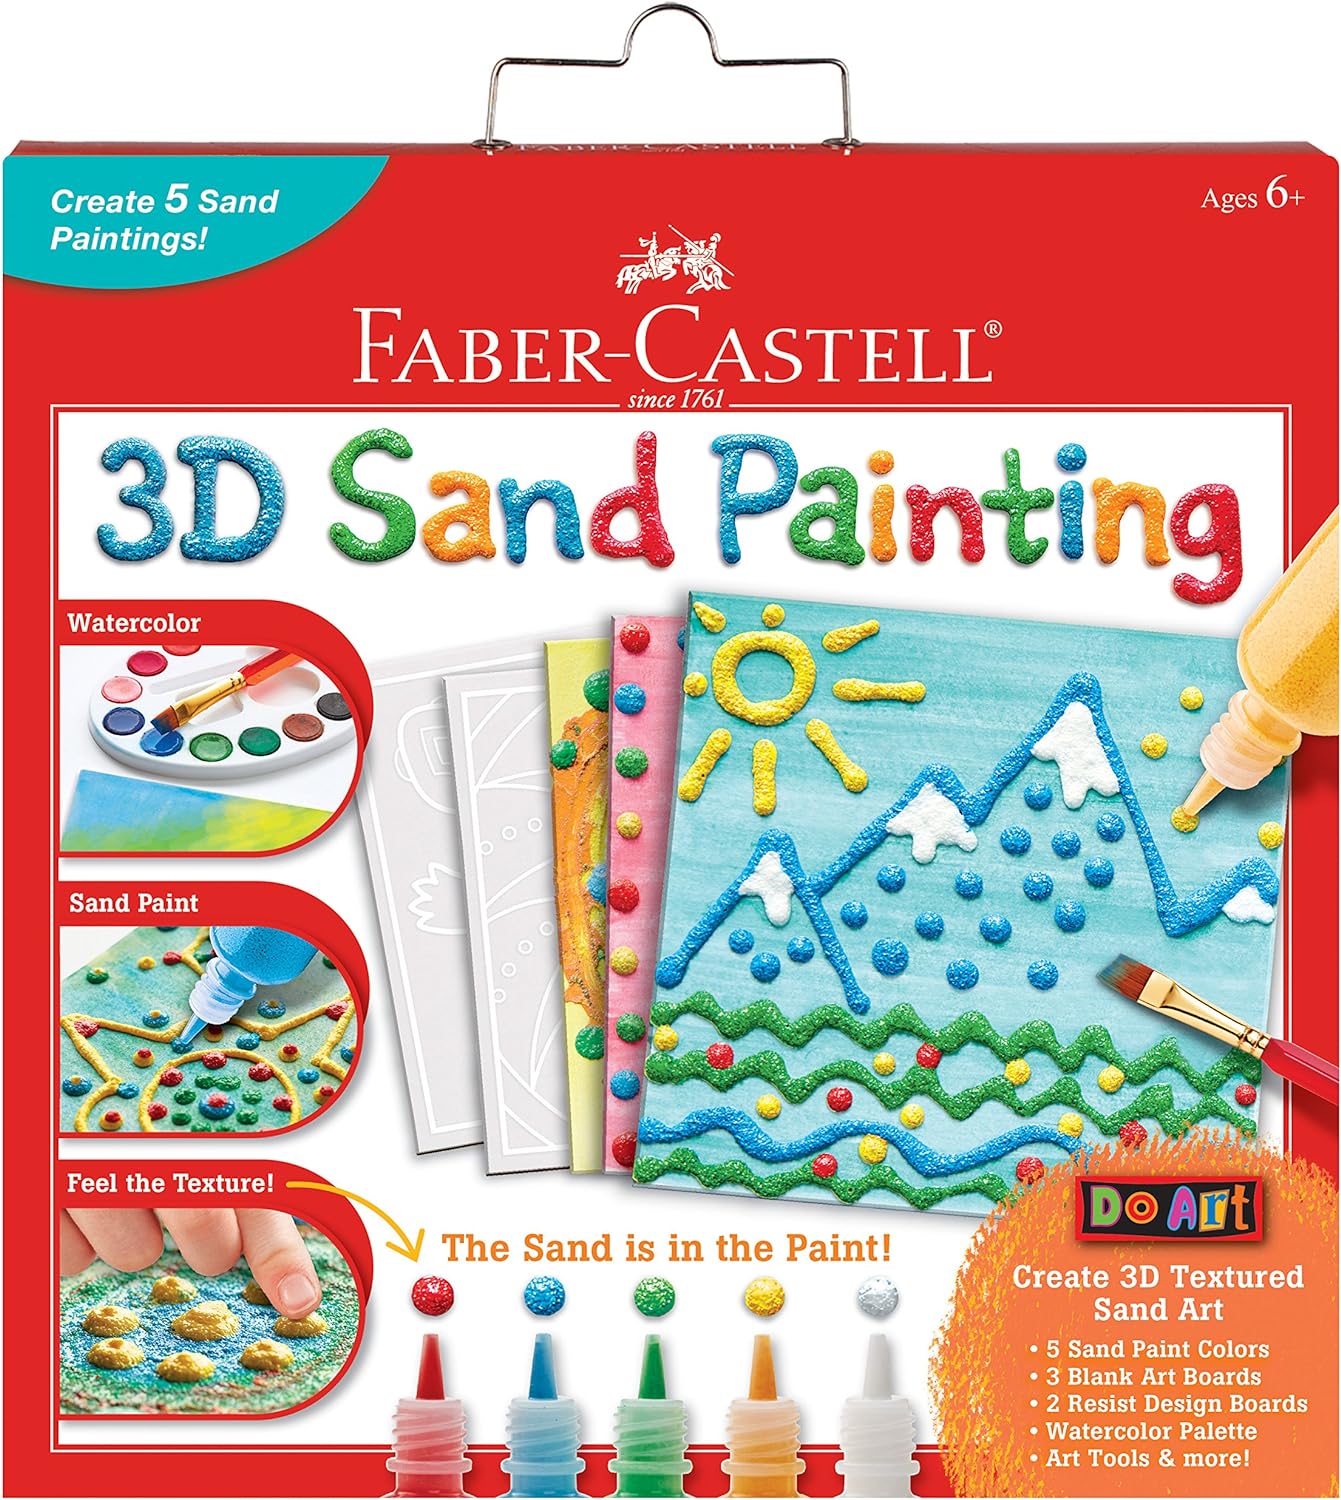 3D Sand Painting Kit for Kids: Make 5 Sand Art Pictures, DIY Arts and Crafts for Kids Ages 6-8+, Art Projects and Gifts for Girls and Boys, Red, yellow, green, blue, and white.